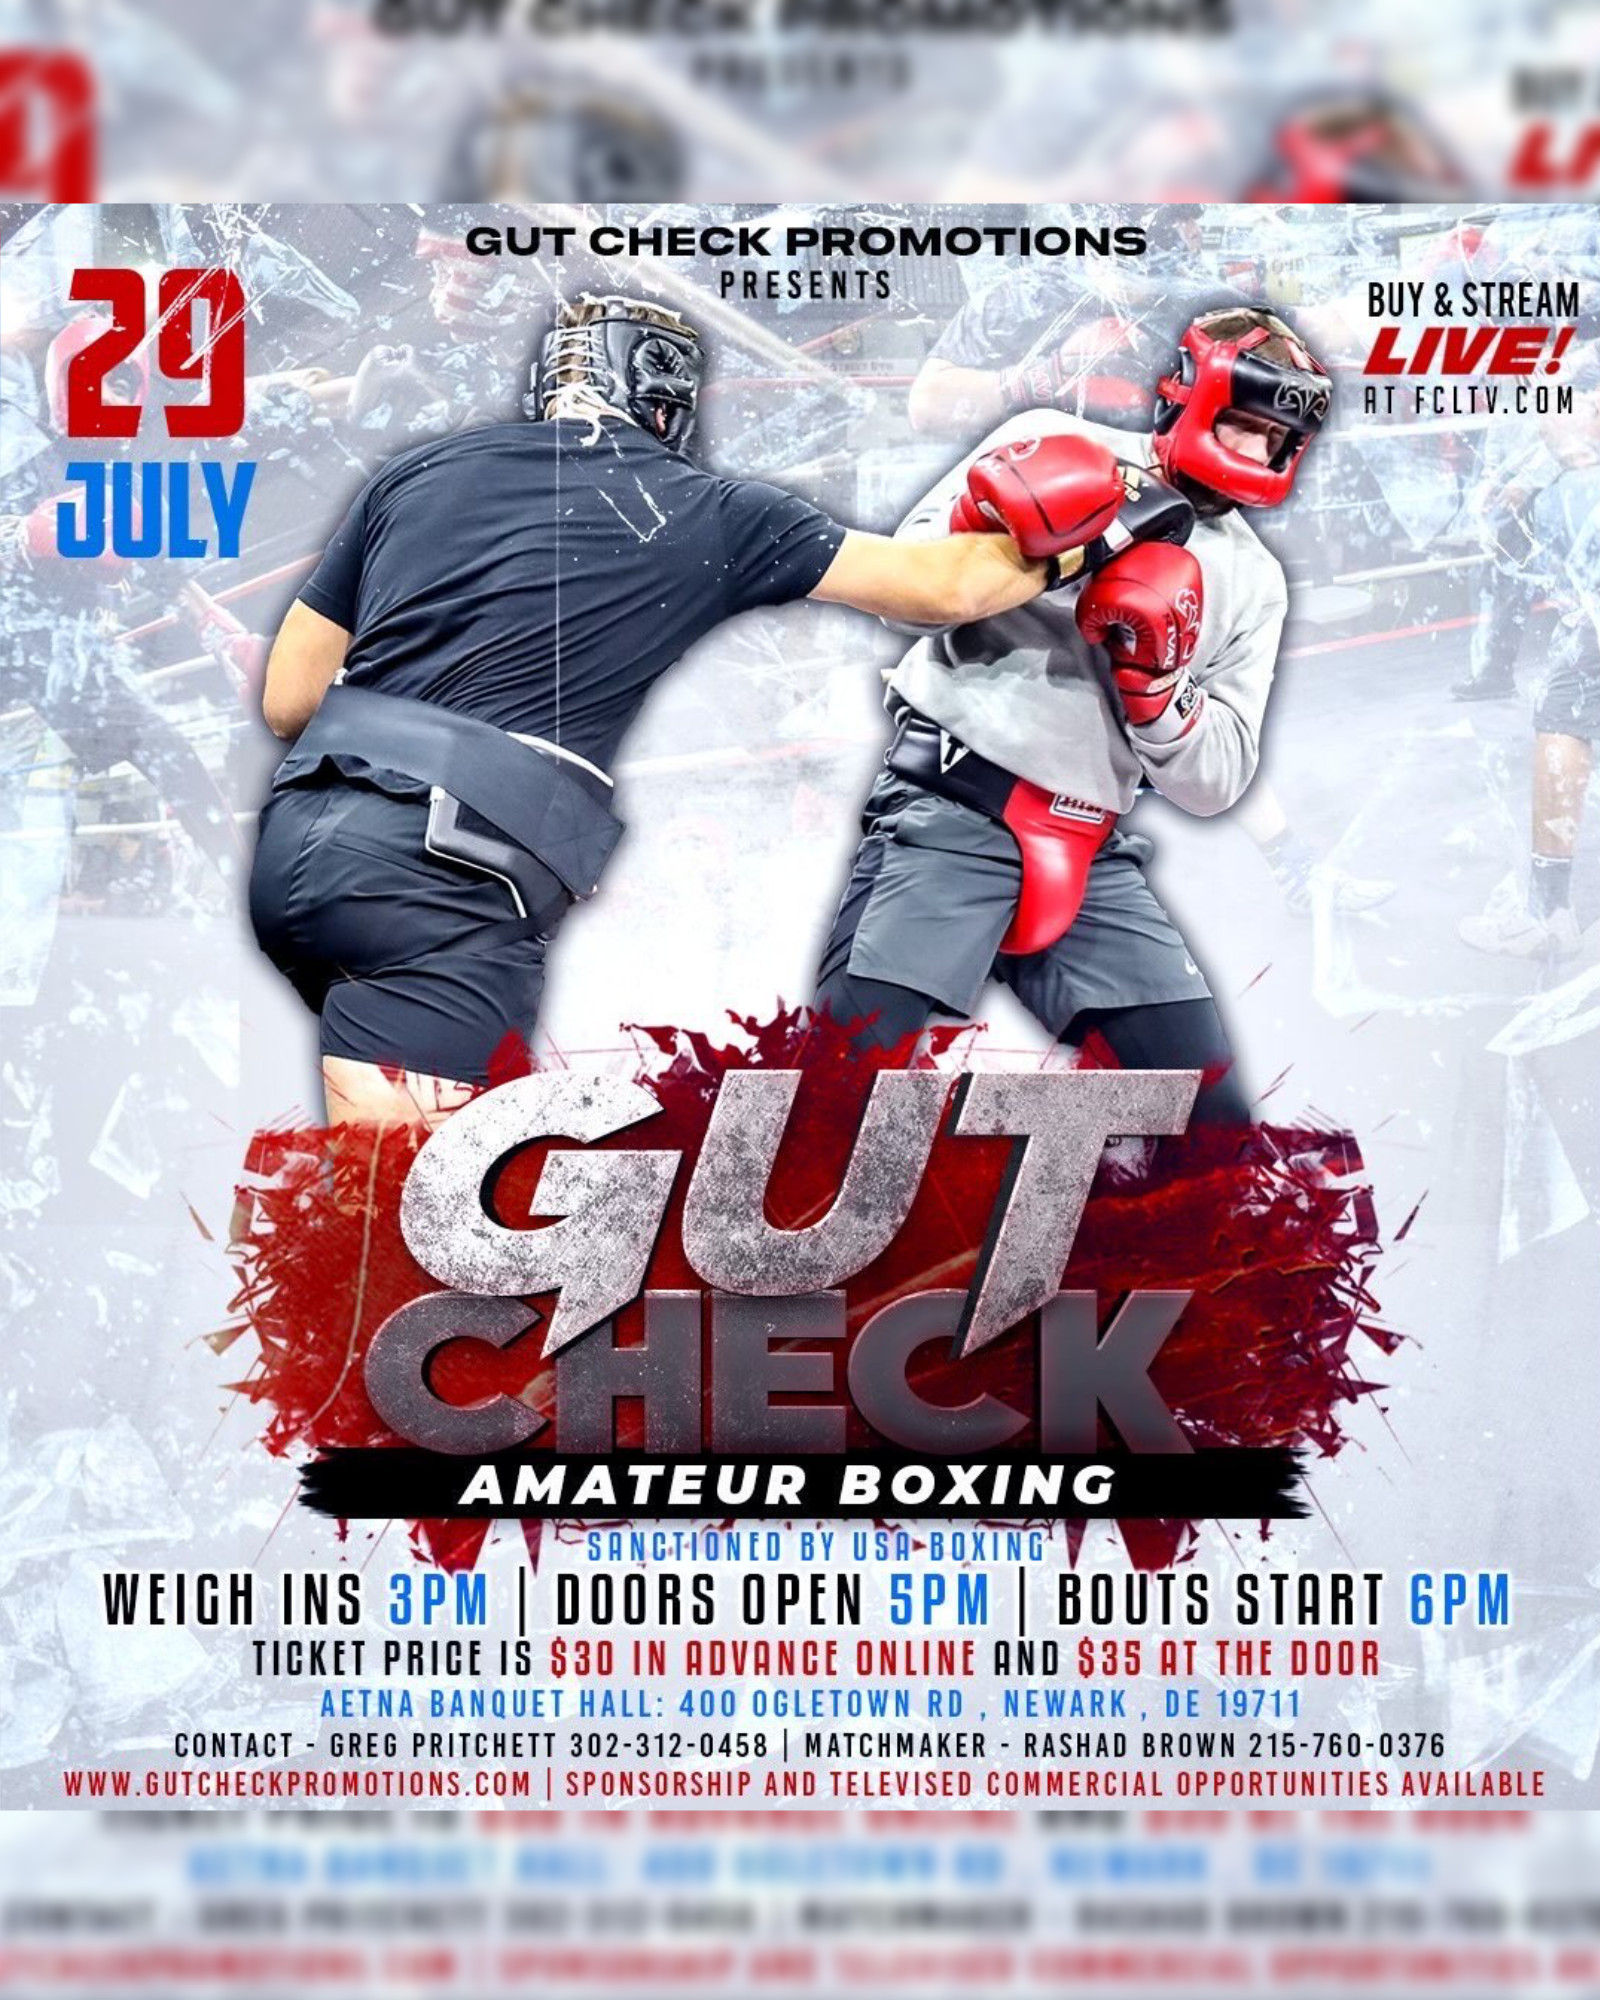 Watch FCLTV Gut Check Promotions Amateur Boxing on Combat Sports Now